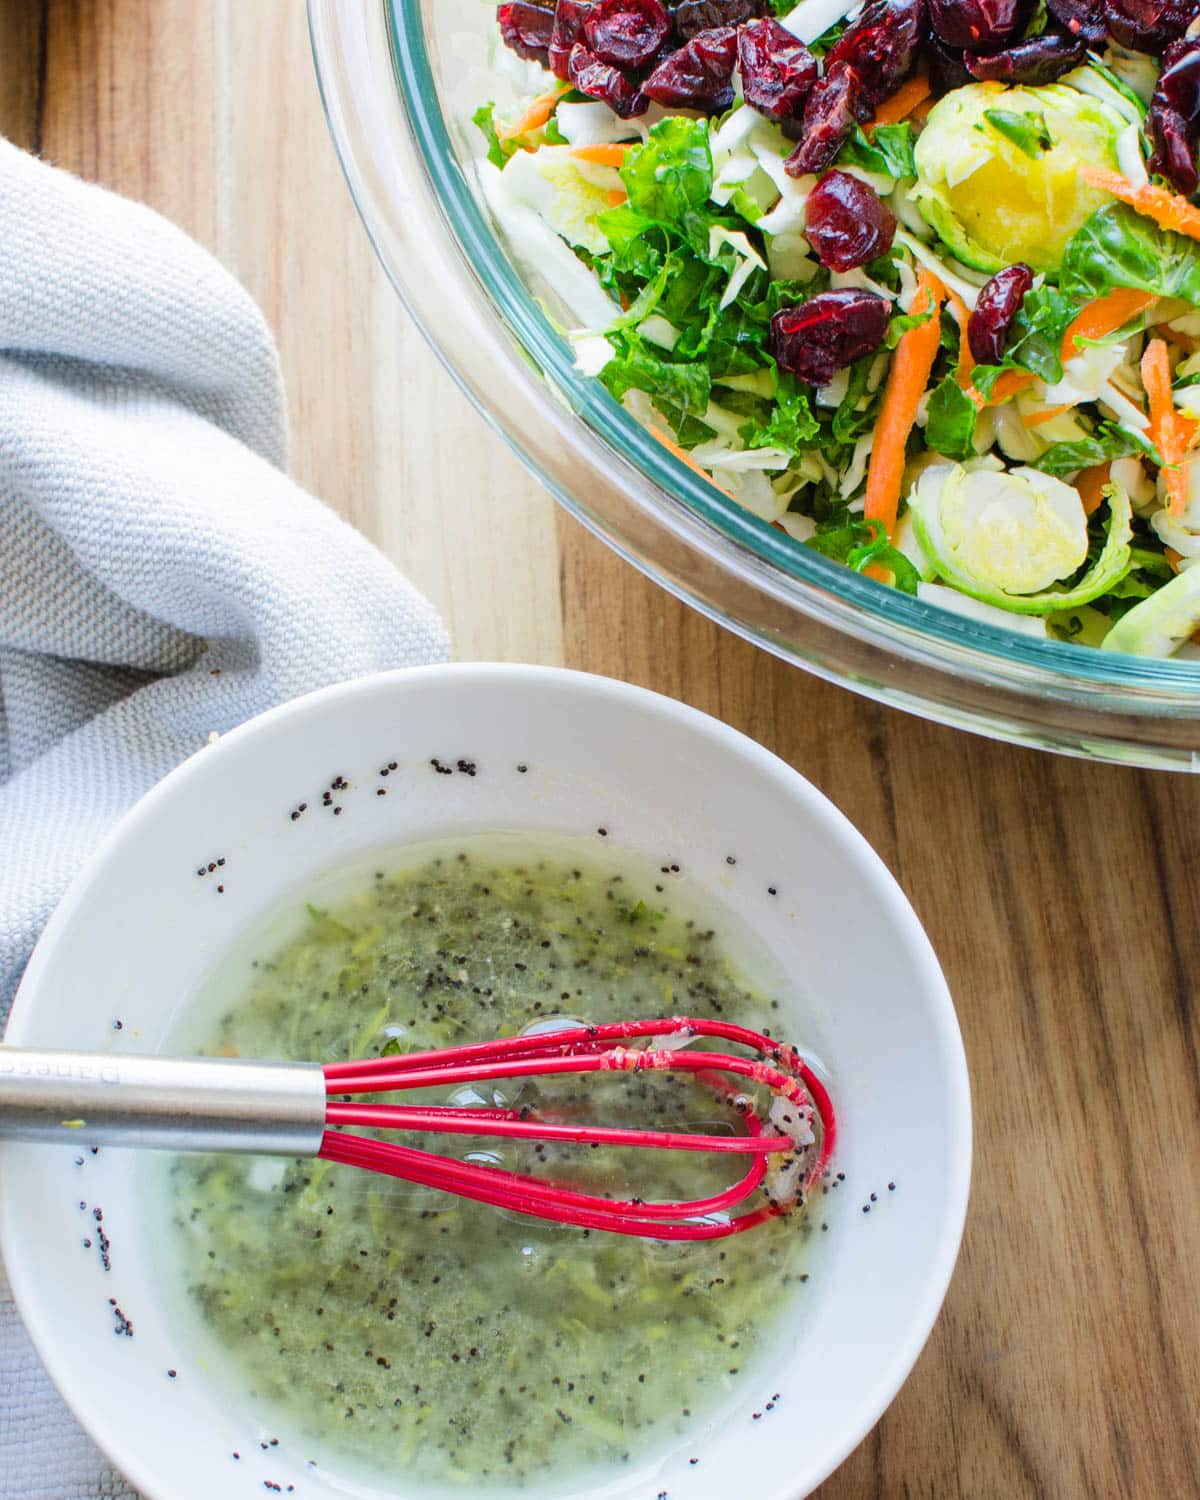 Whisking the poppyseed dressing in a bowl to add to the cabbage salad.